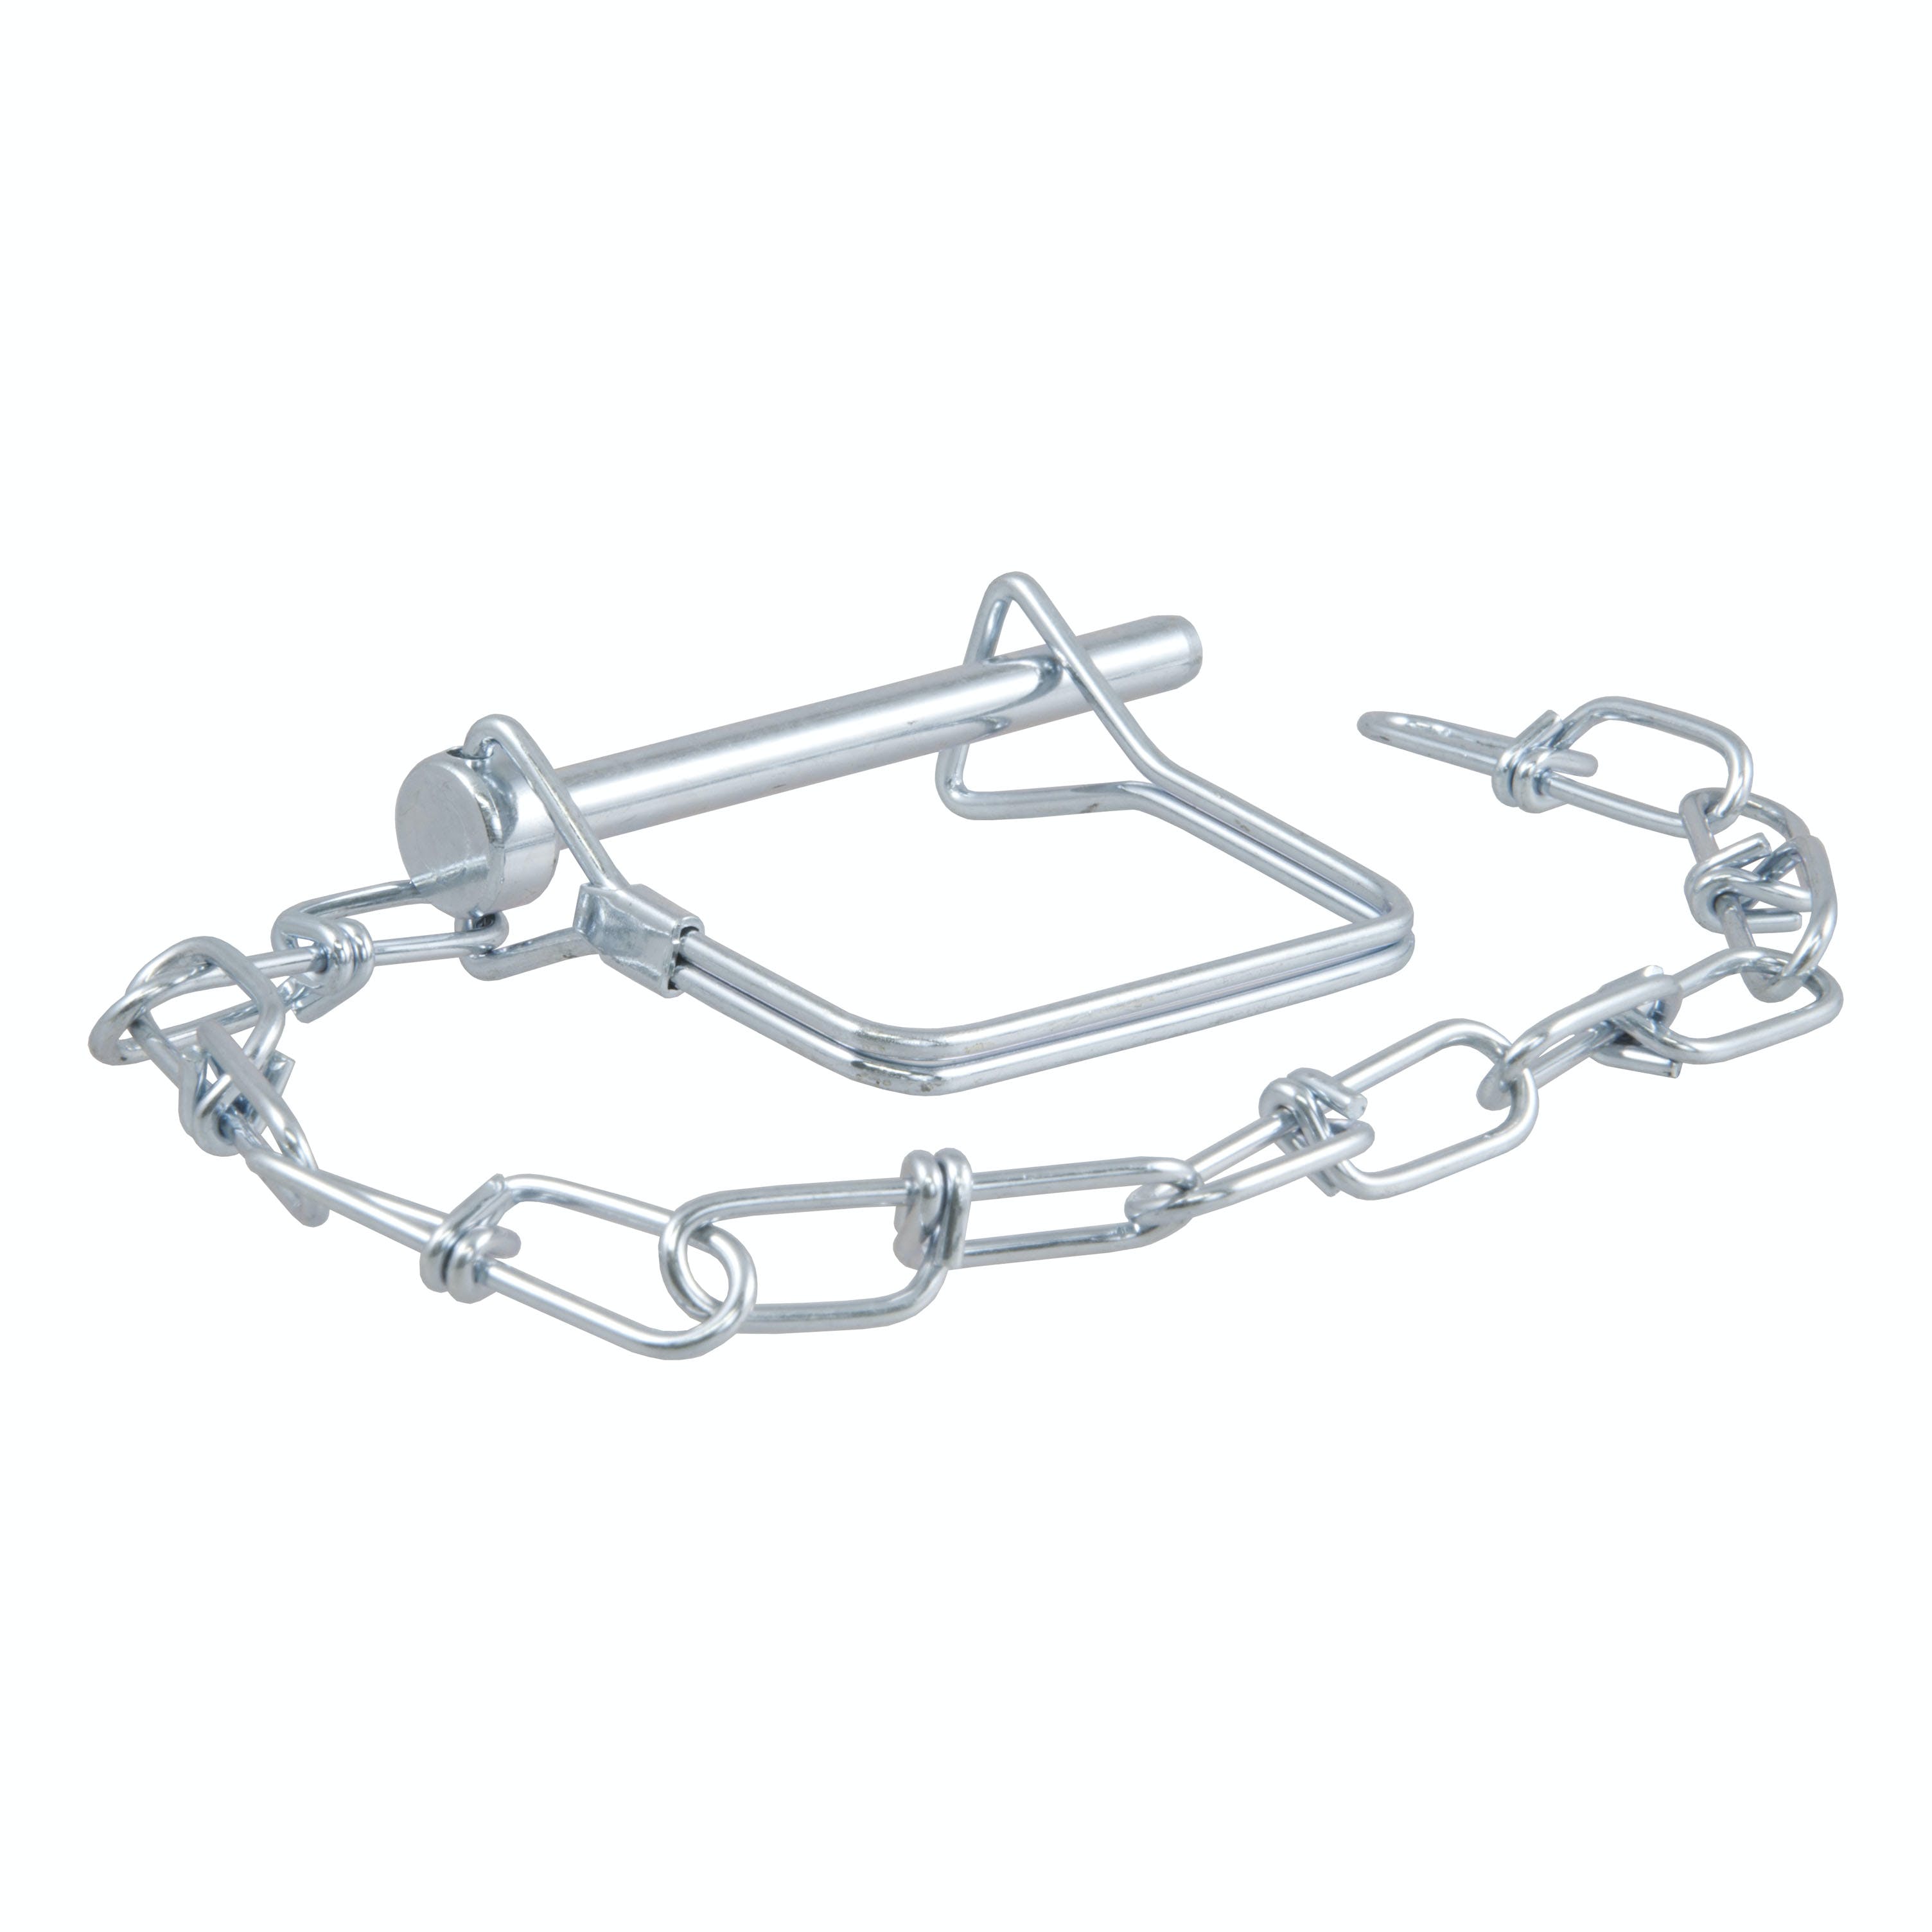 CURT 25013 1/4 Safety Pin with 12 Chain (2-3/4 Pin Length, Packaged)